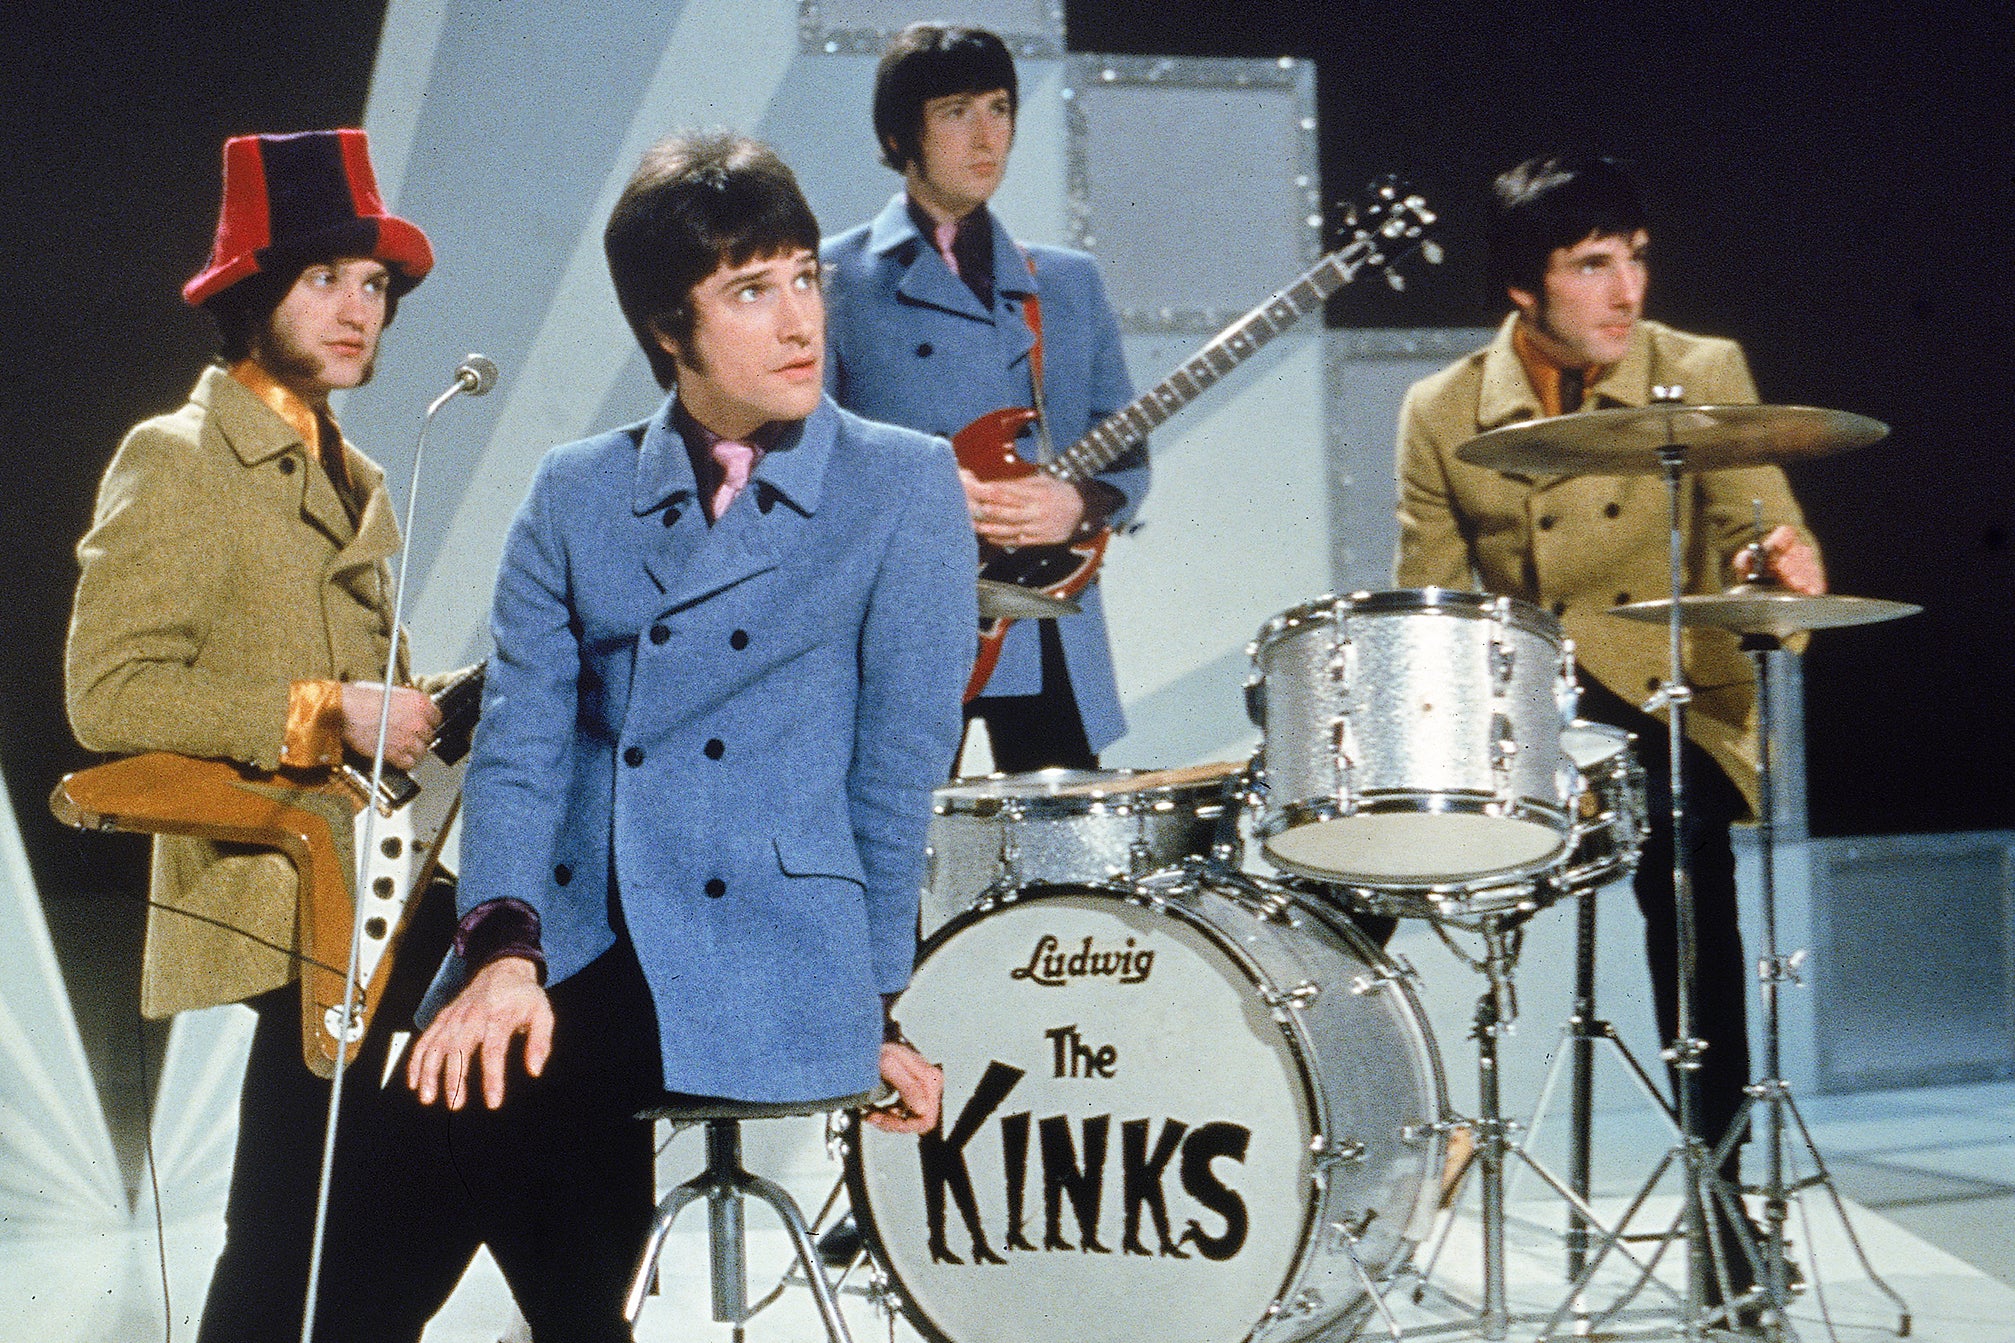 The Kinks – from left, Dave Davies, Ray Davies, Pete Quaife and Mick Avory – on the set of TV show ‘Ready to Perform’ in 1968